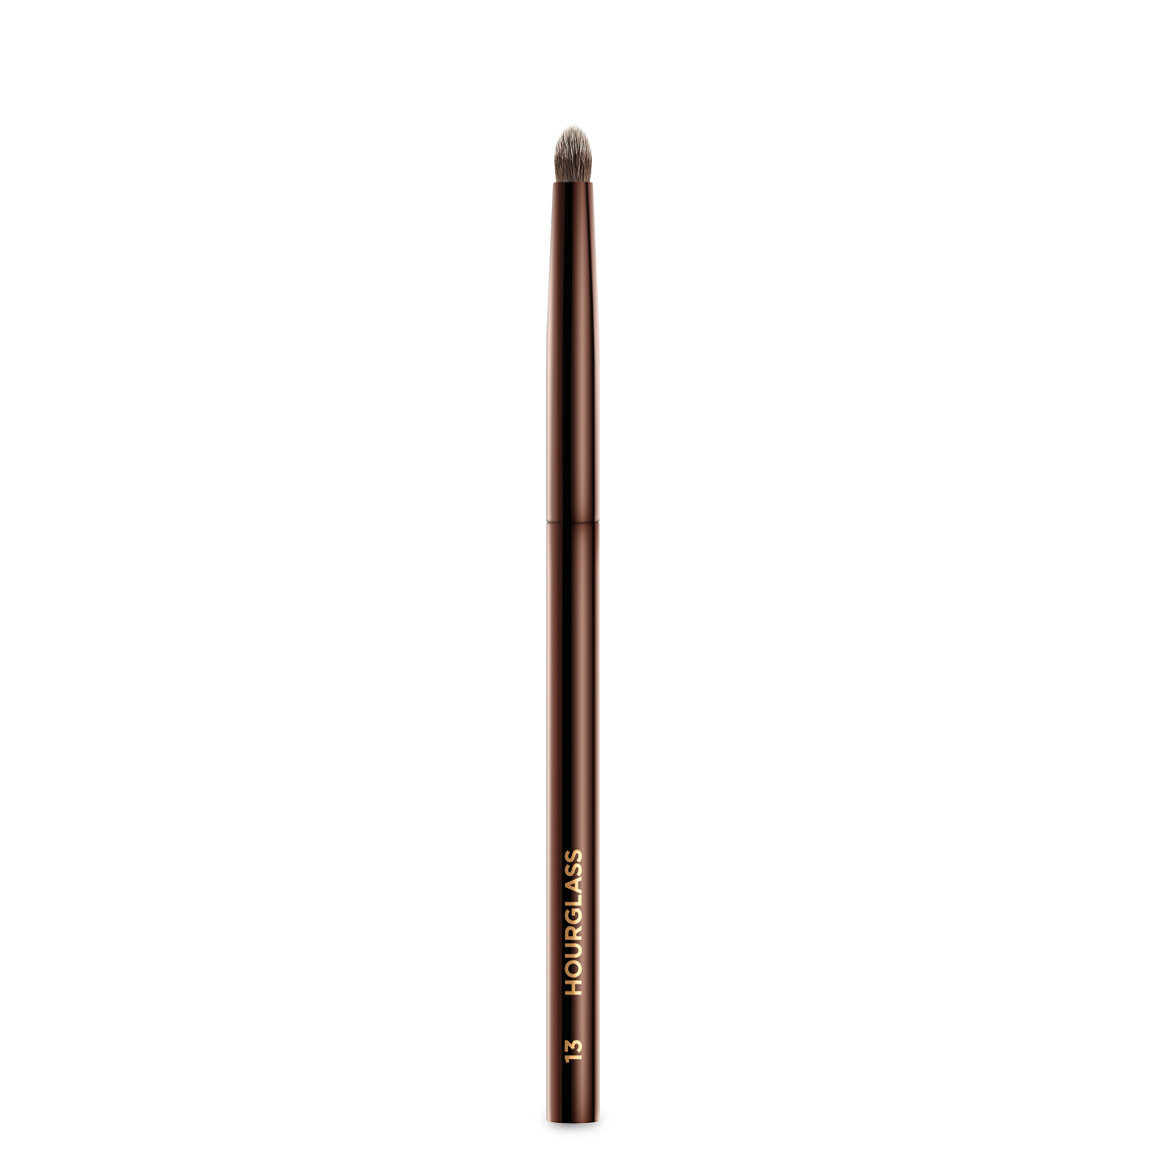 Hourglass N° 13 Precision Smudge Brush alternative view 1 - product swatch.